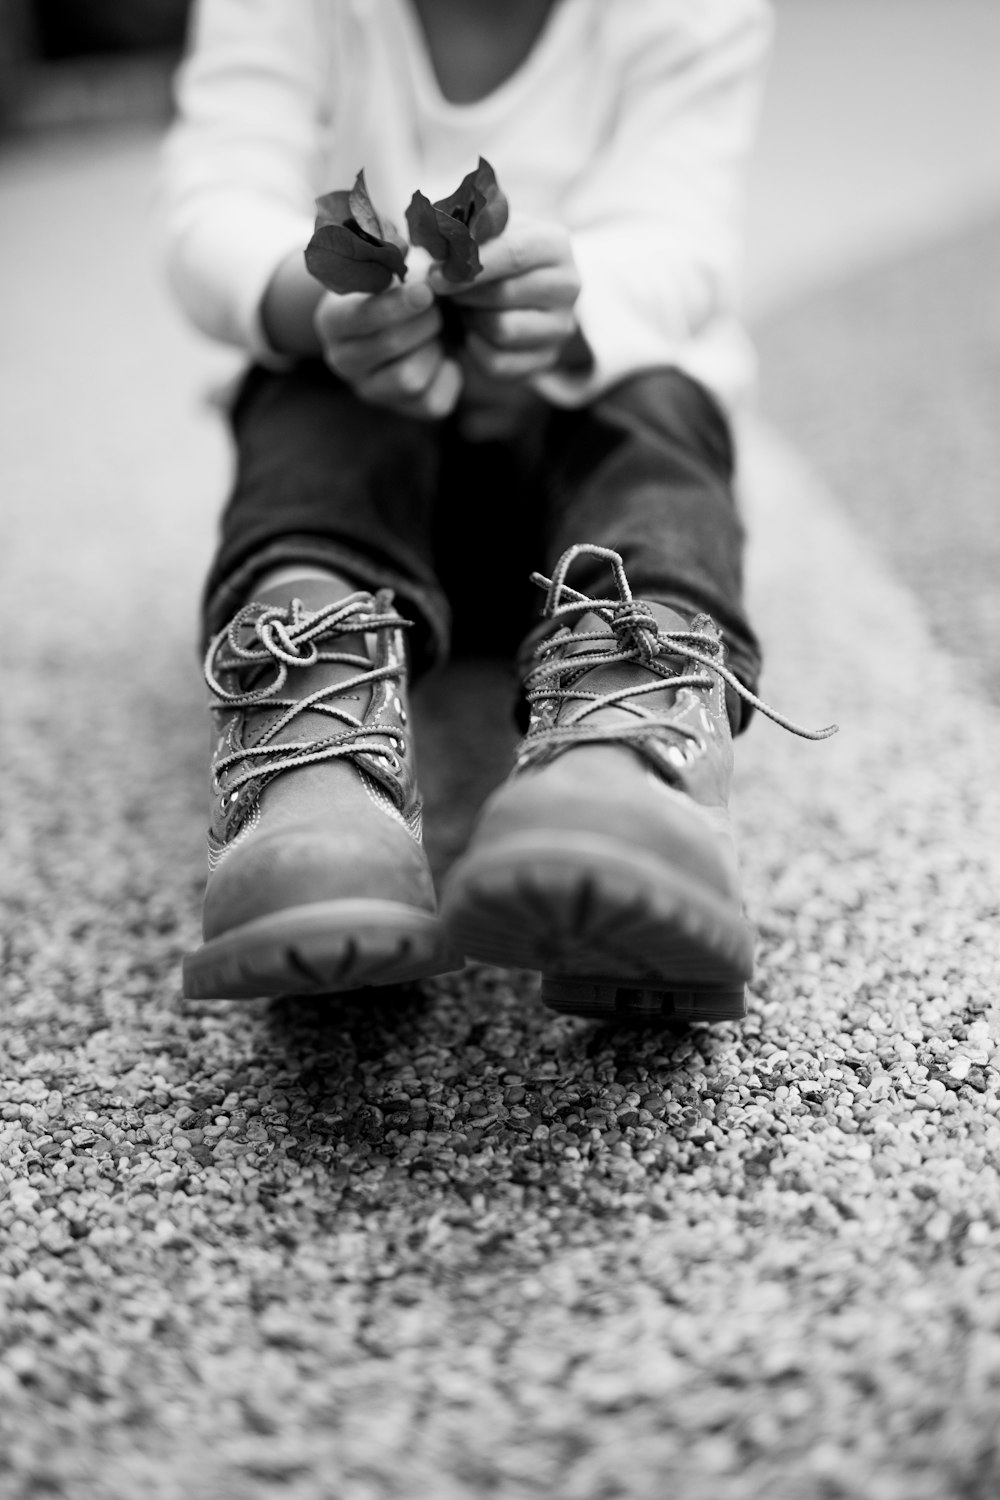 grayscale photo of person wearing hiking shoes